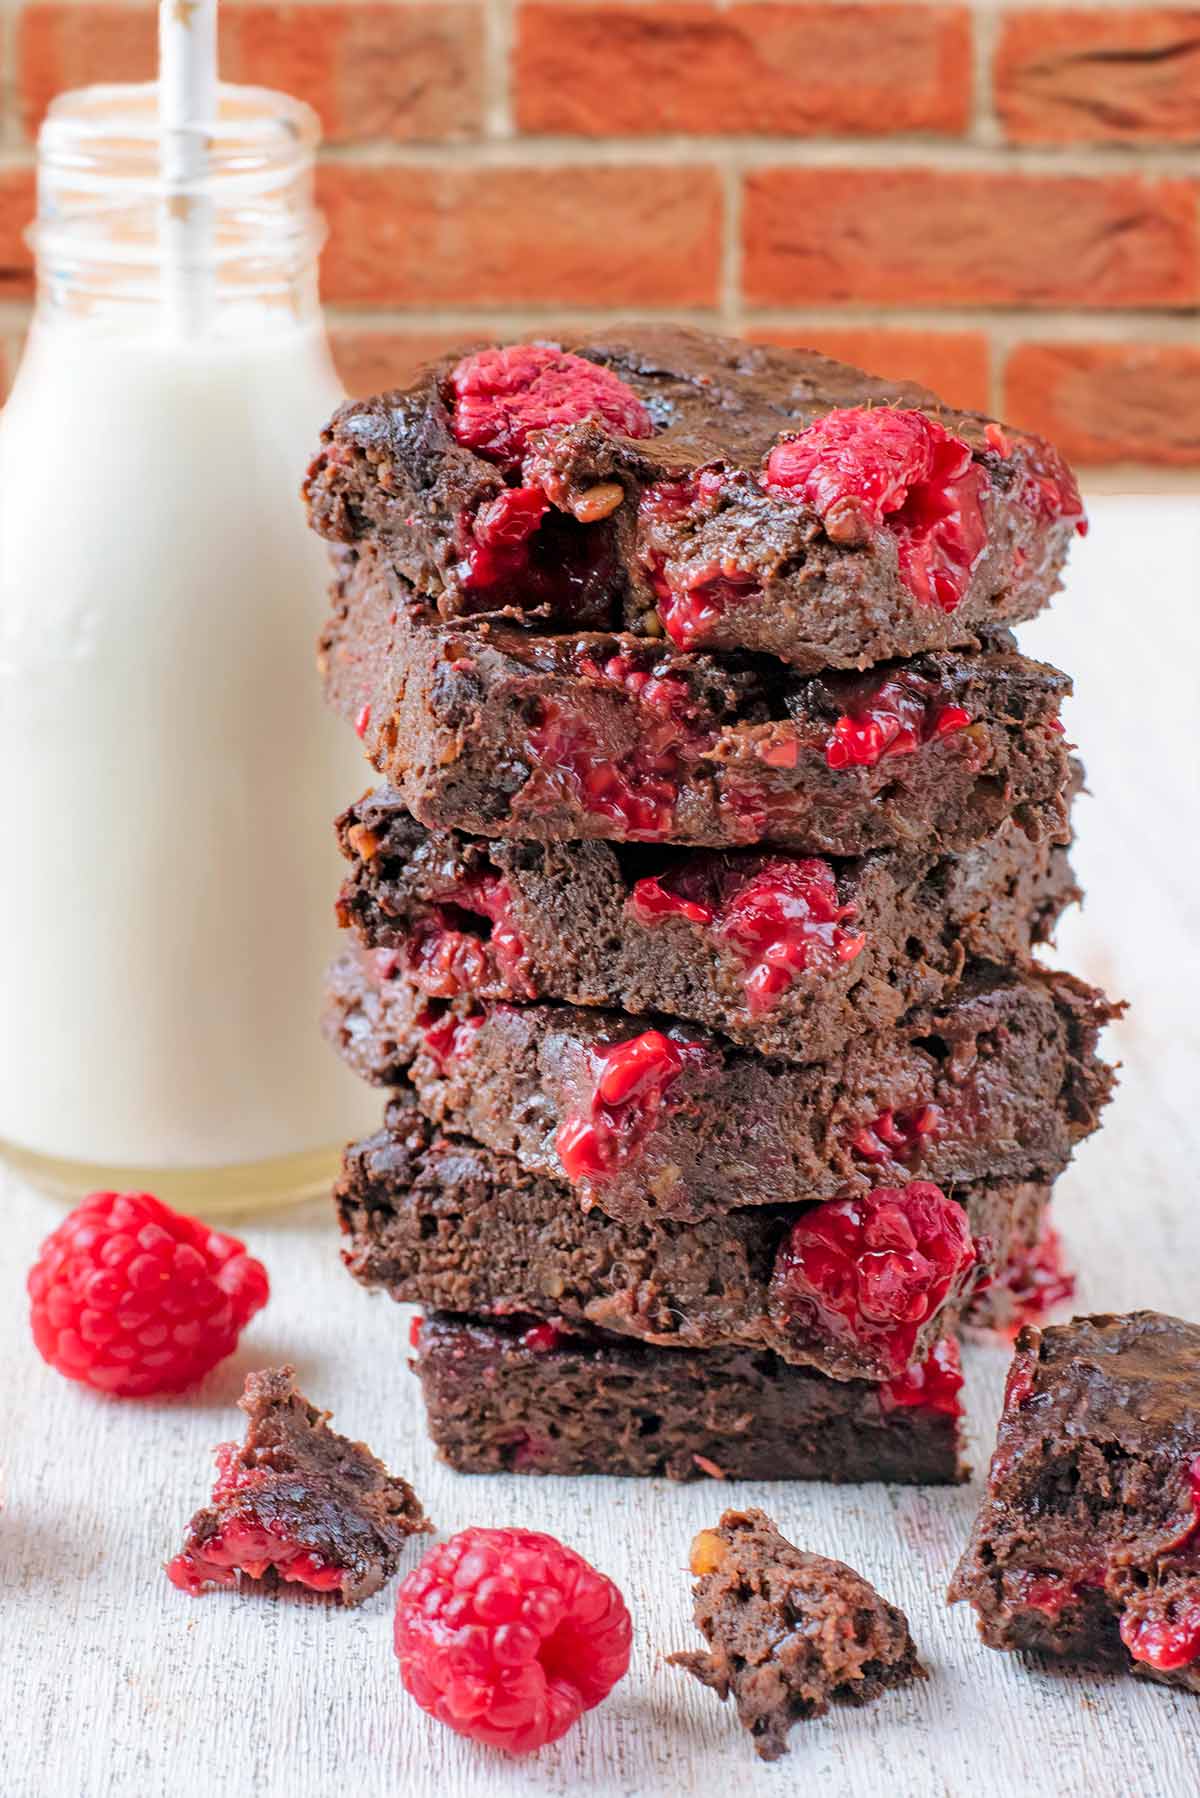 A stack of six chocolate raspberry brownies next to a bottle of milk.